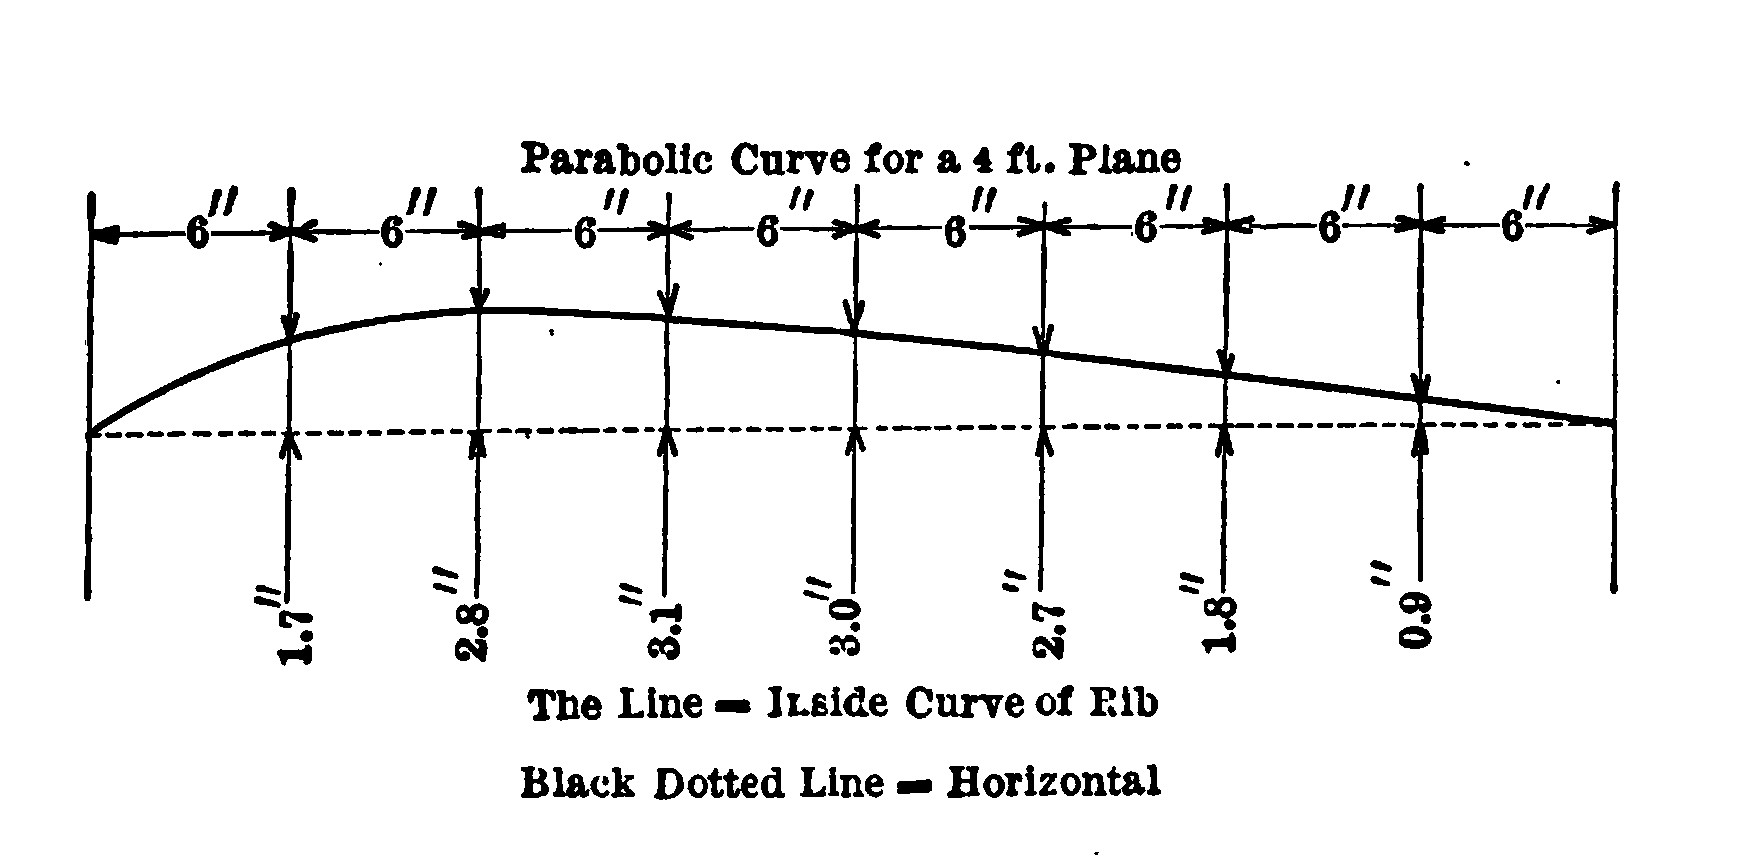 Parabolic Curve for a 4 ft. Plane